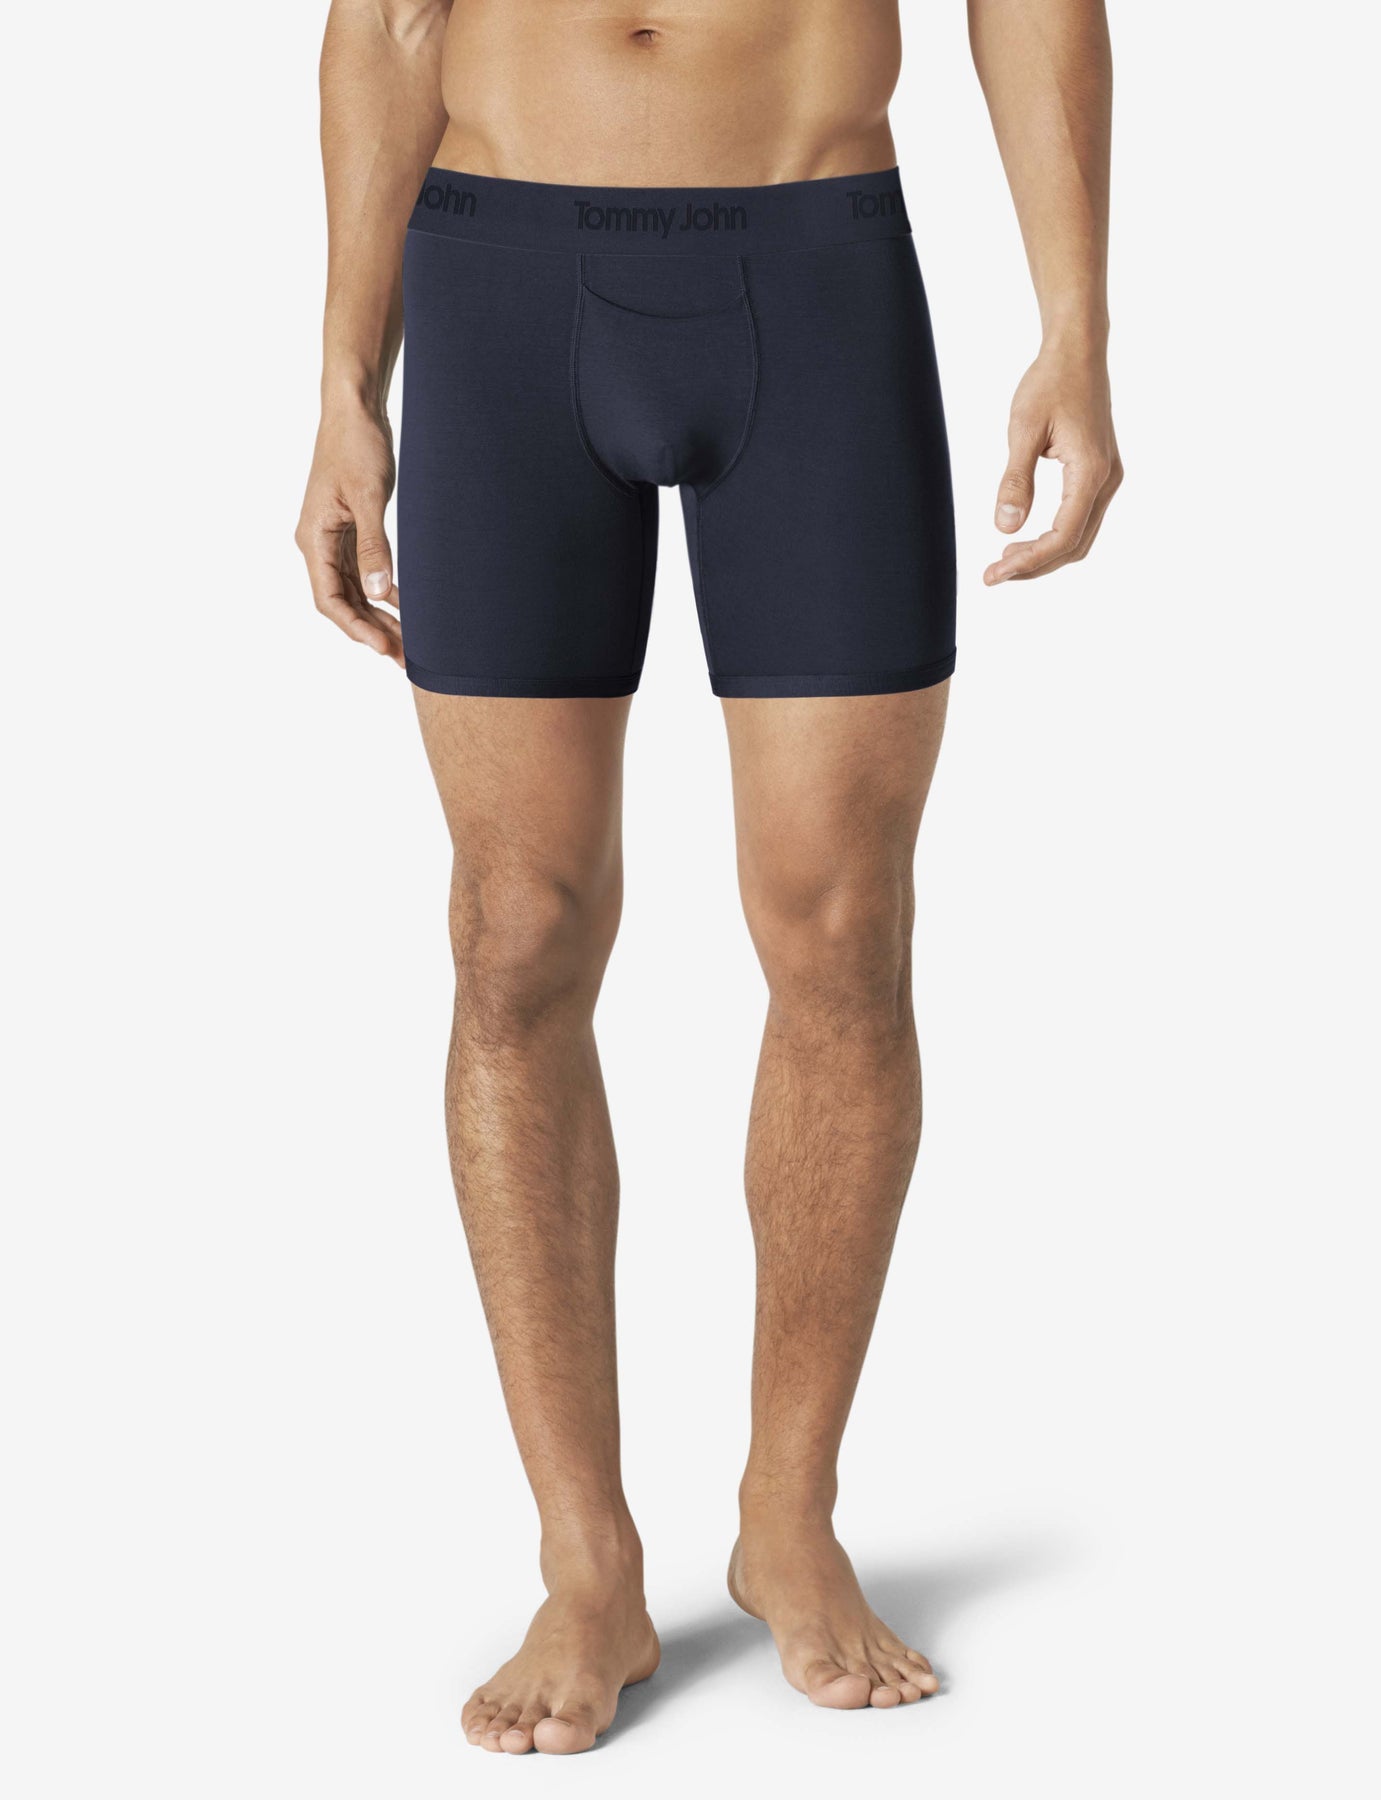 Second Skin Mid-Length Boxer Brief 